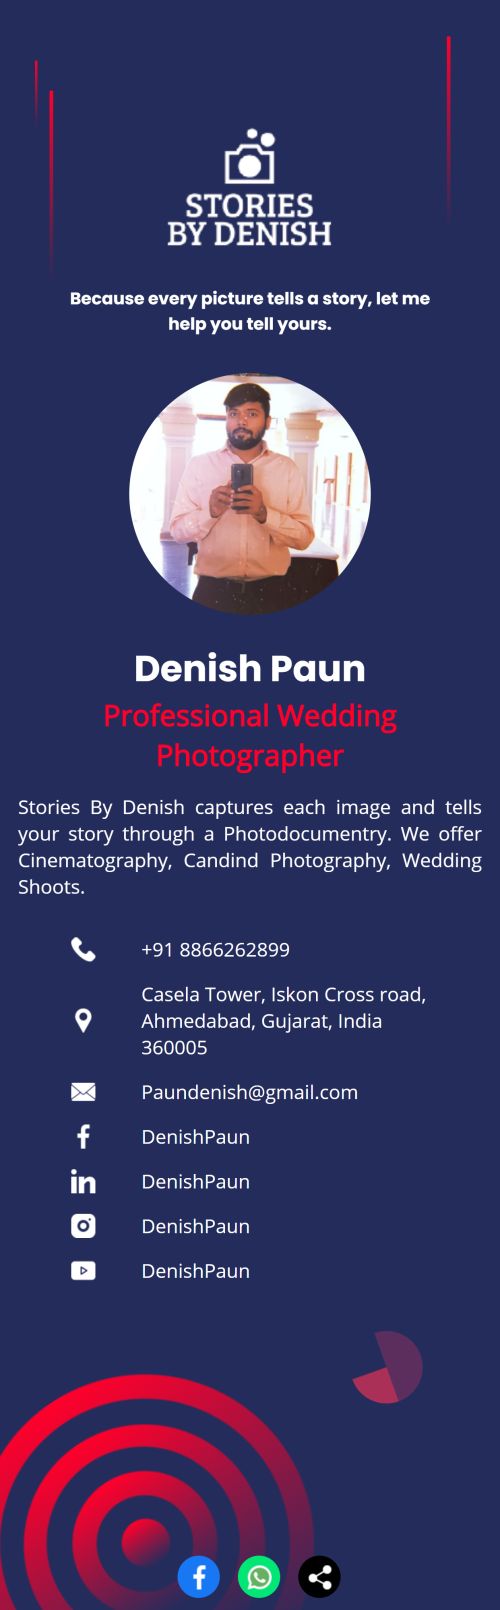 ccl0018 - Denish Paun - Stories by Denish - Digital Visiting Card by CardNet